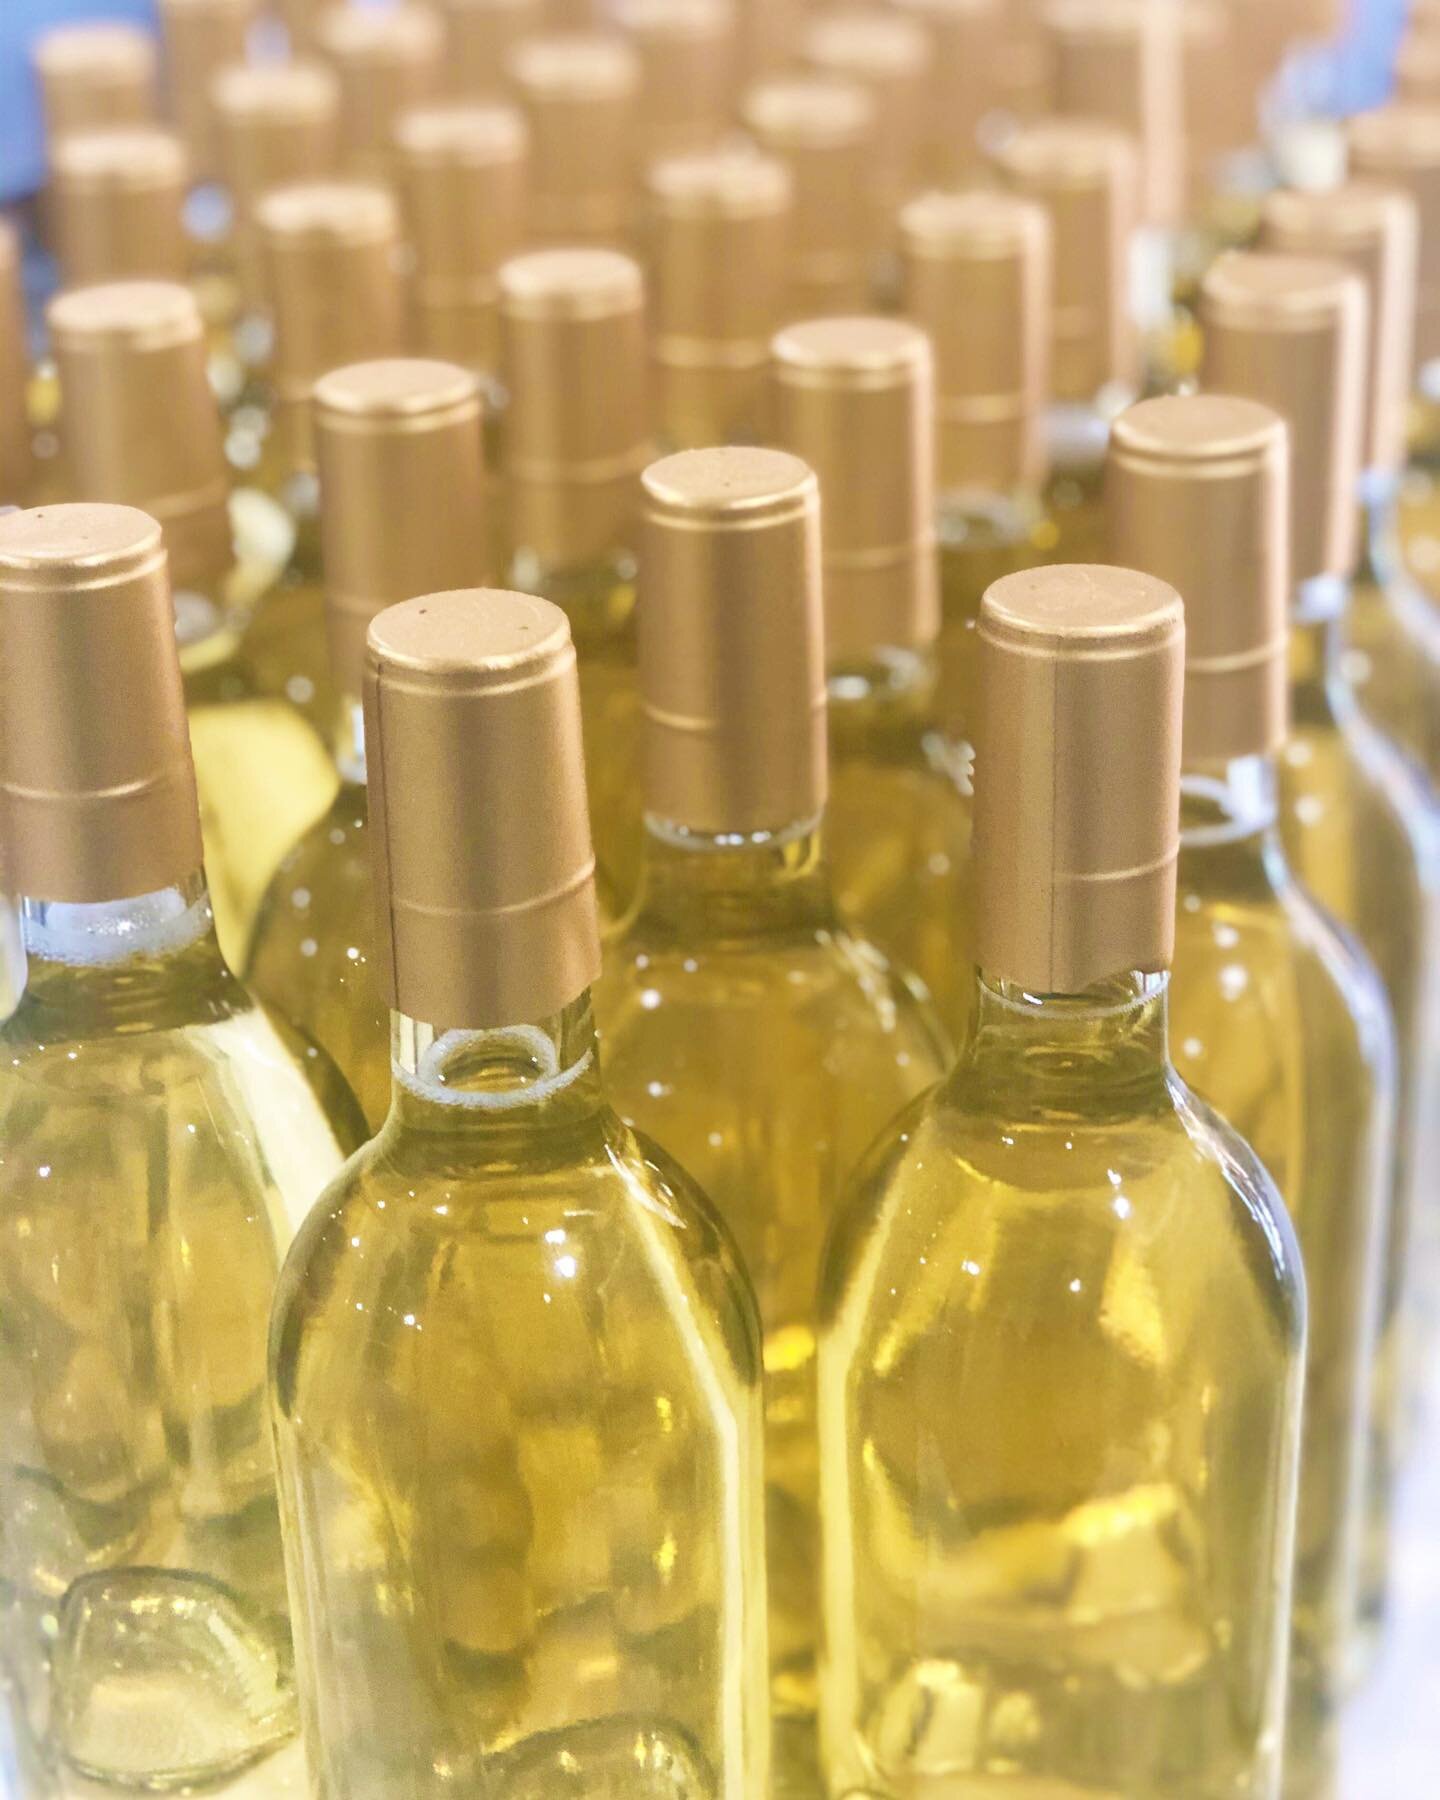 2018 Sauvignon Blanc bottled ✔️ For this varietal we use &lsquo;Sur Lie&rsquo; aging during production (aka on the lees), a process which adds a lot of texture &amp; flavor to the wine! So, when you&rsquo;re sipping this fine wine- give a cheers to t